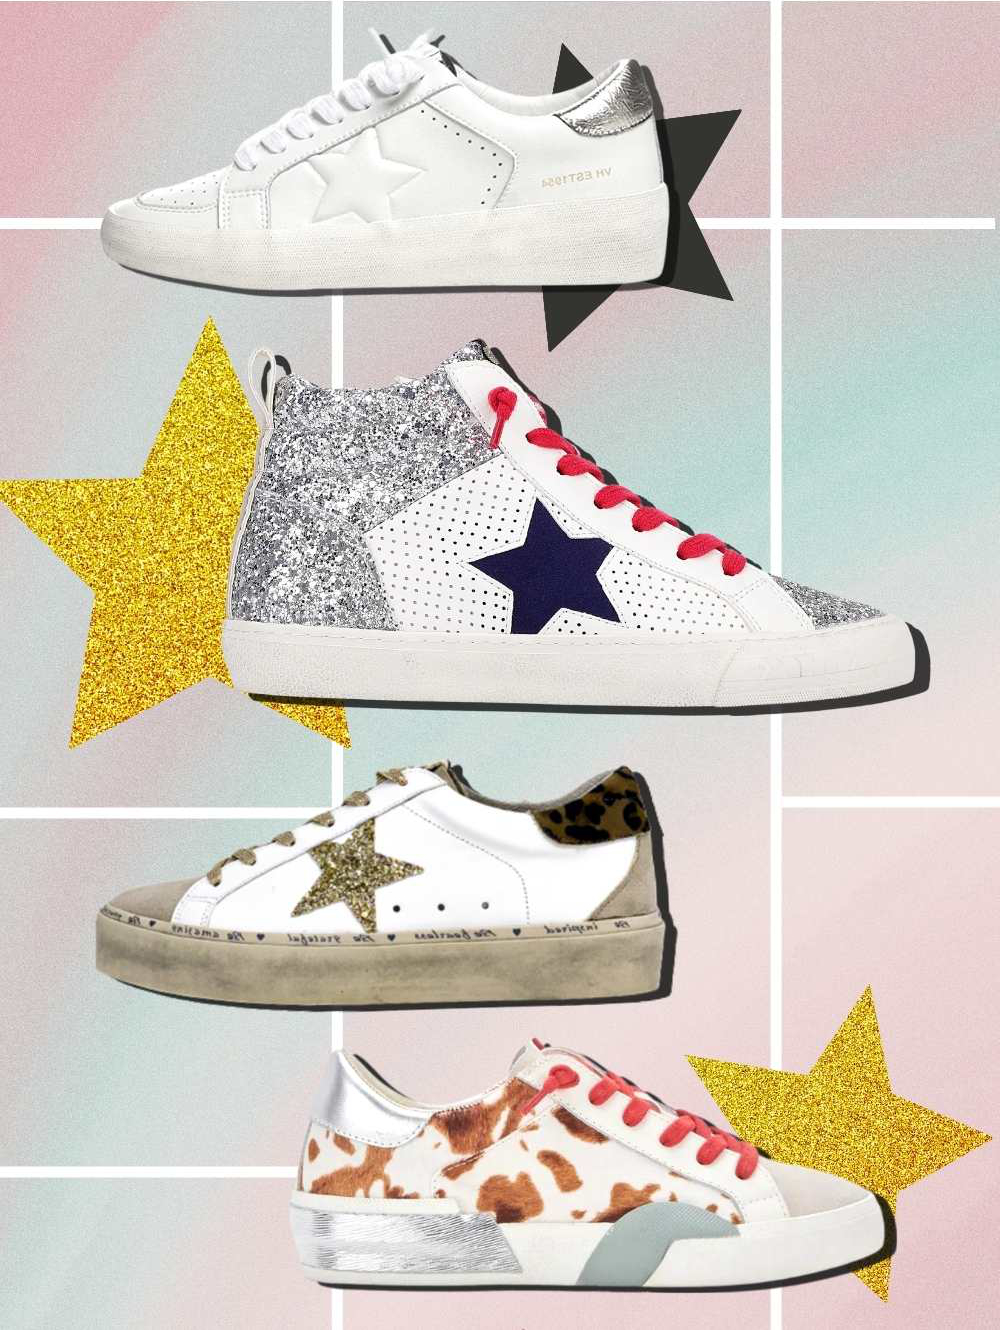 & Best Golden Goose Dupes & Look-Alikes for a Lower Cost!